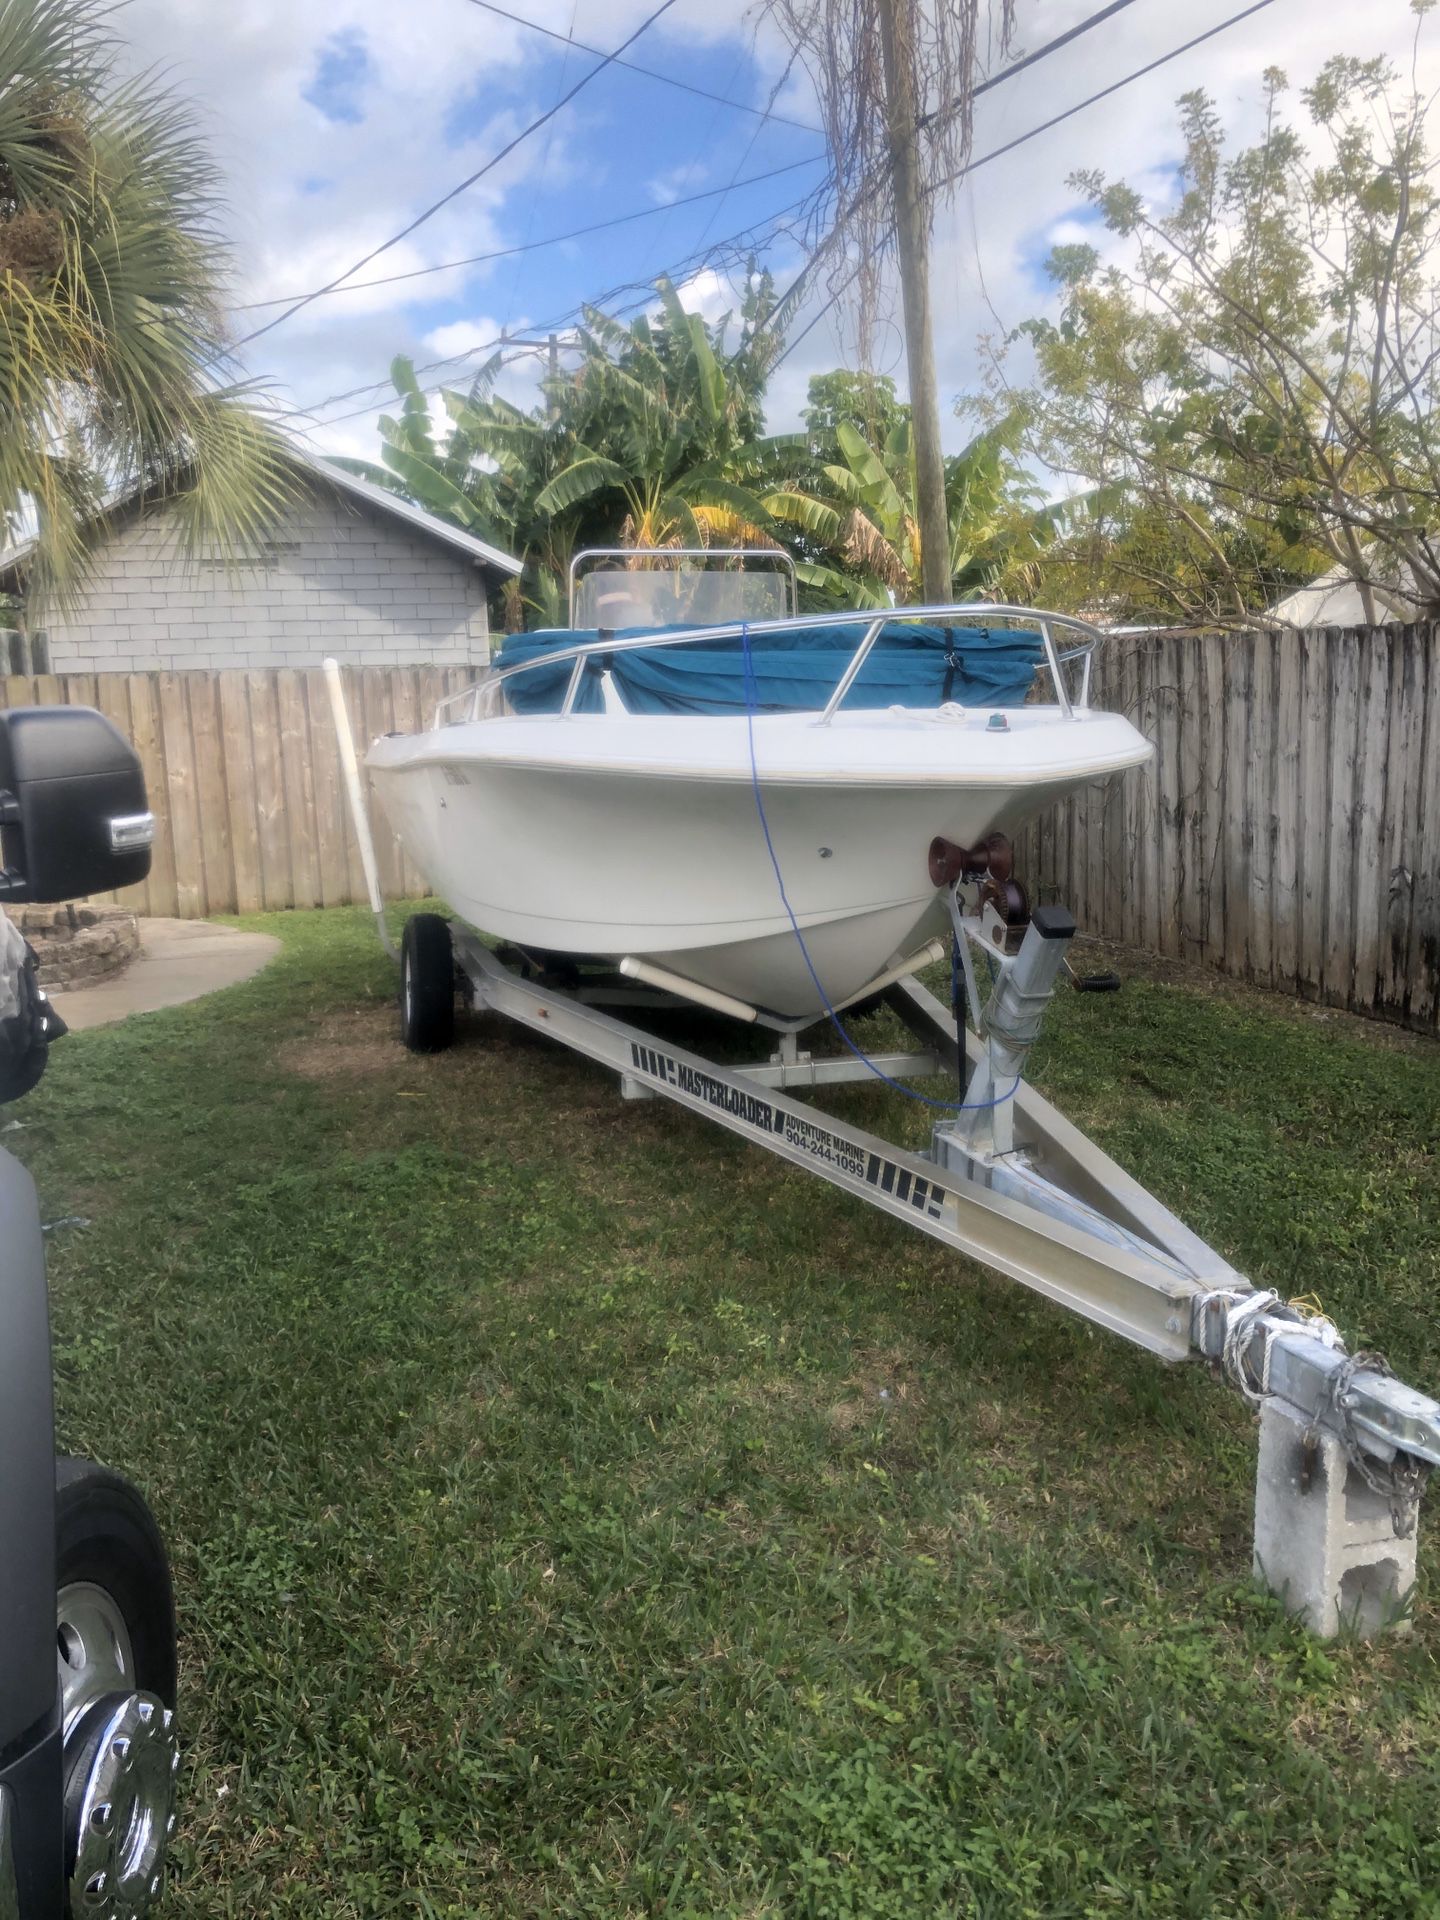 1995 19 ft proline open fisherman with 1995 mercury 135 hp boat is in amazing condition everything works very solid floors no soft spots no